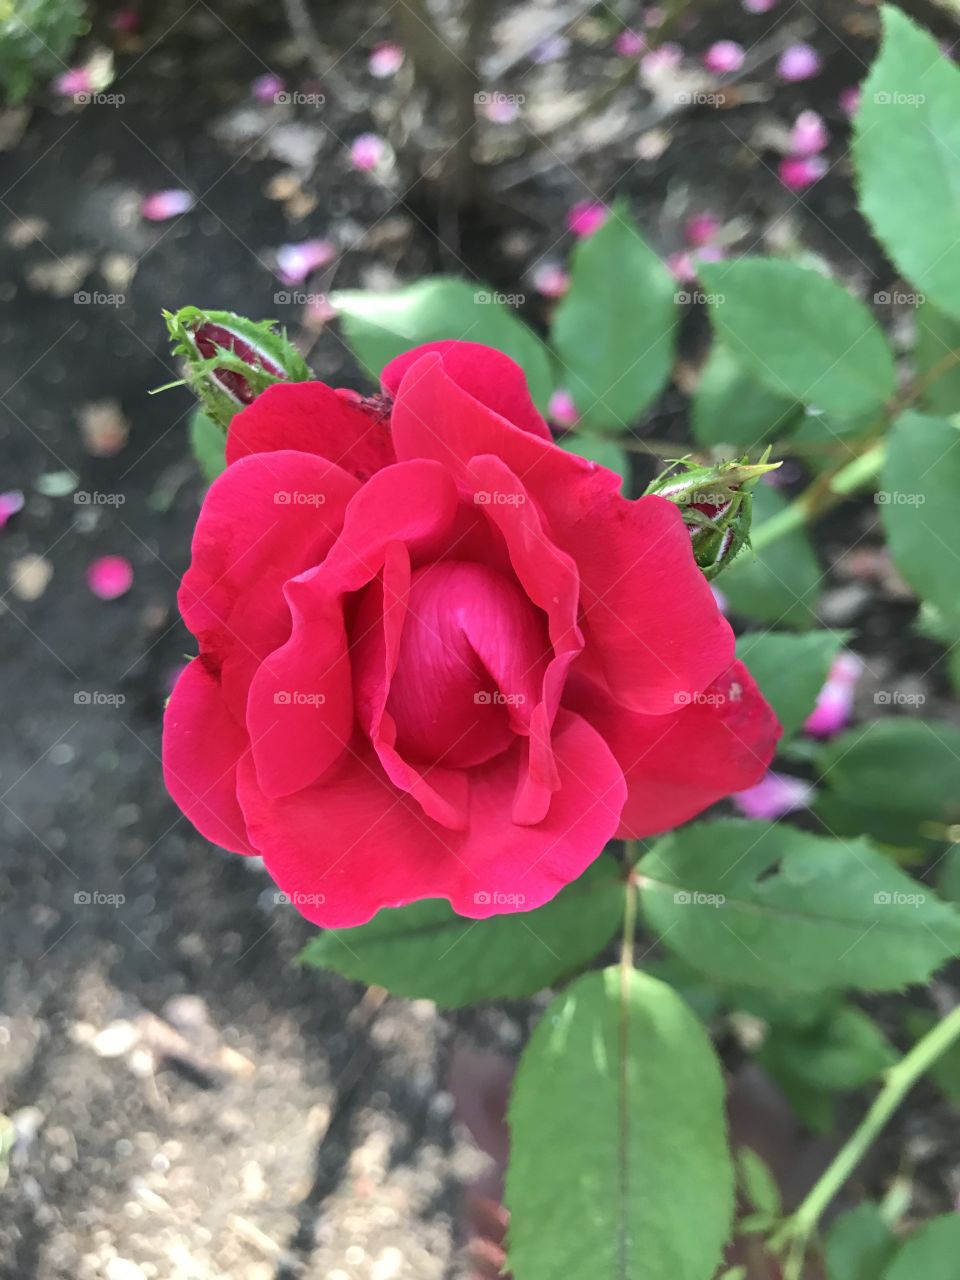 Bright pink rose in bloom